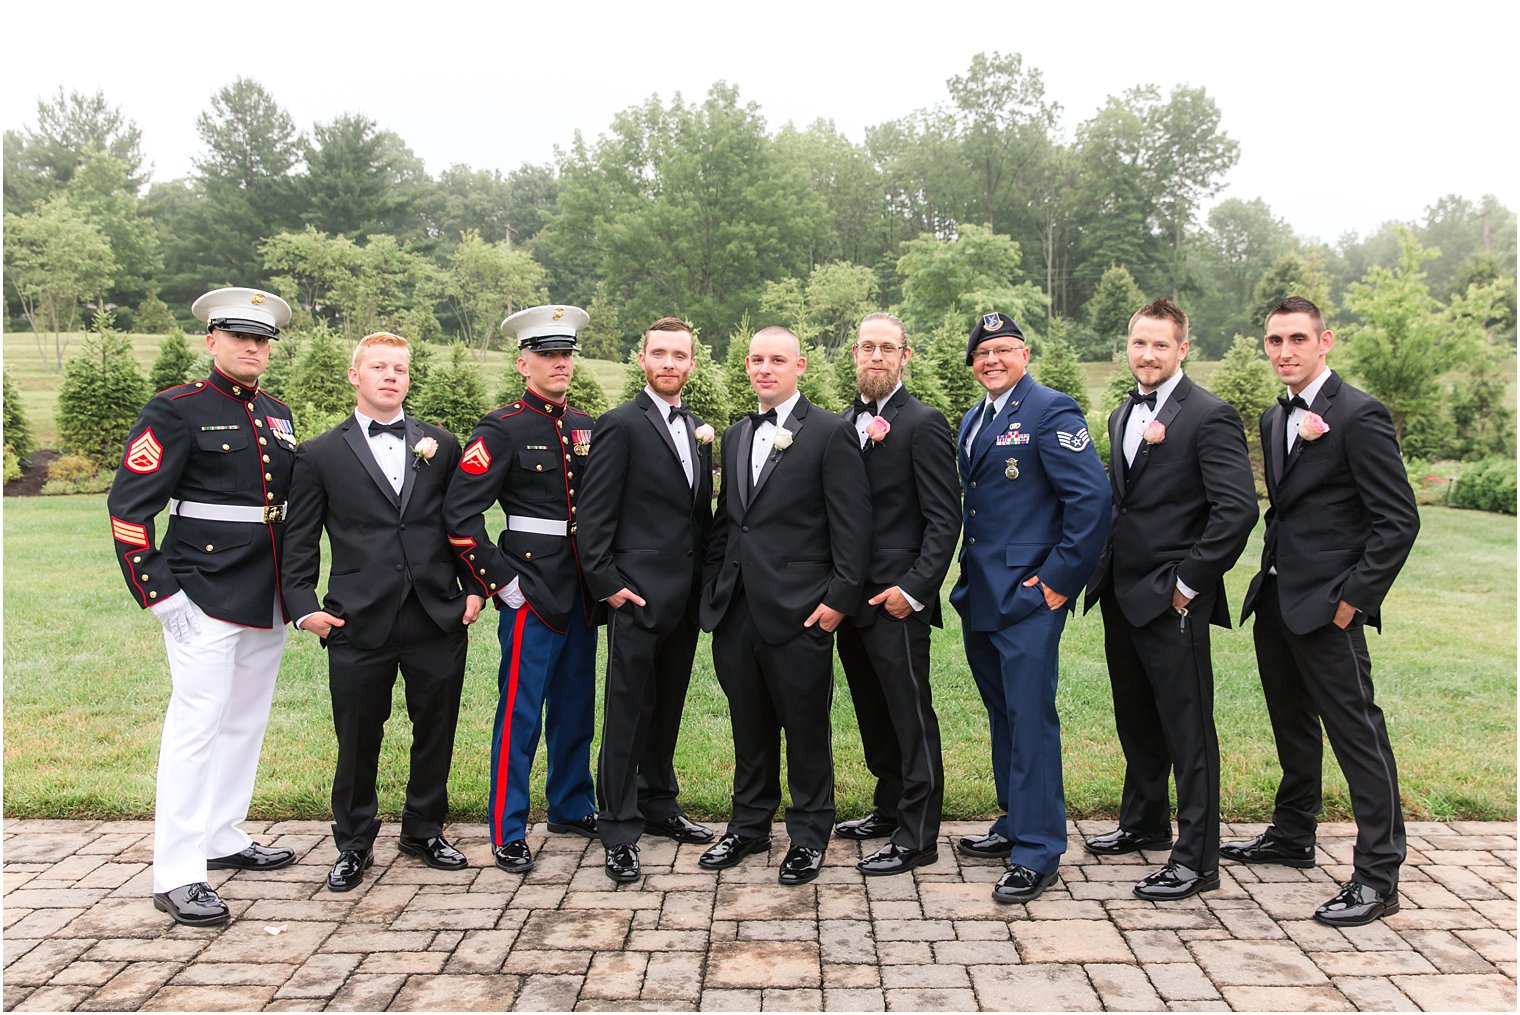 Groomsmen in black tuxedos and military uniforms